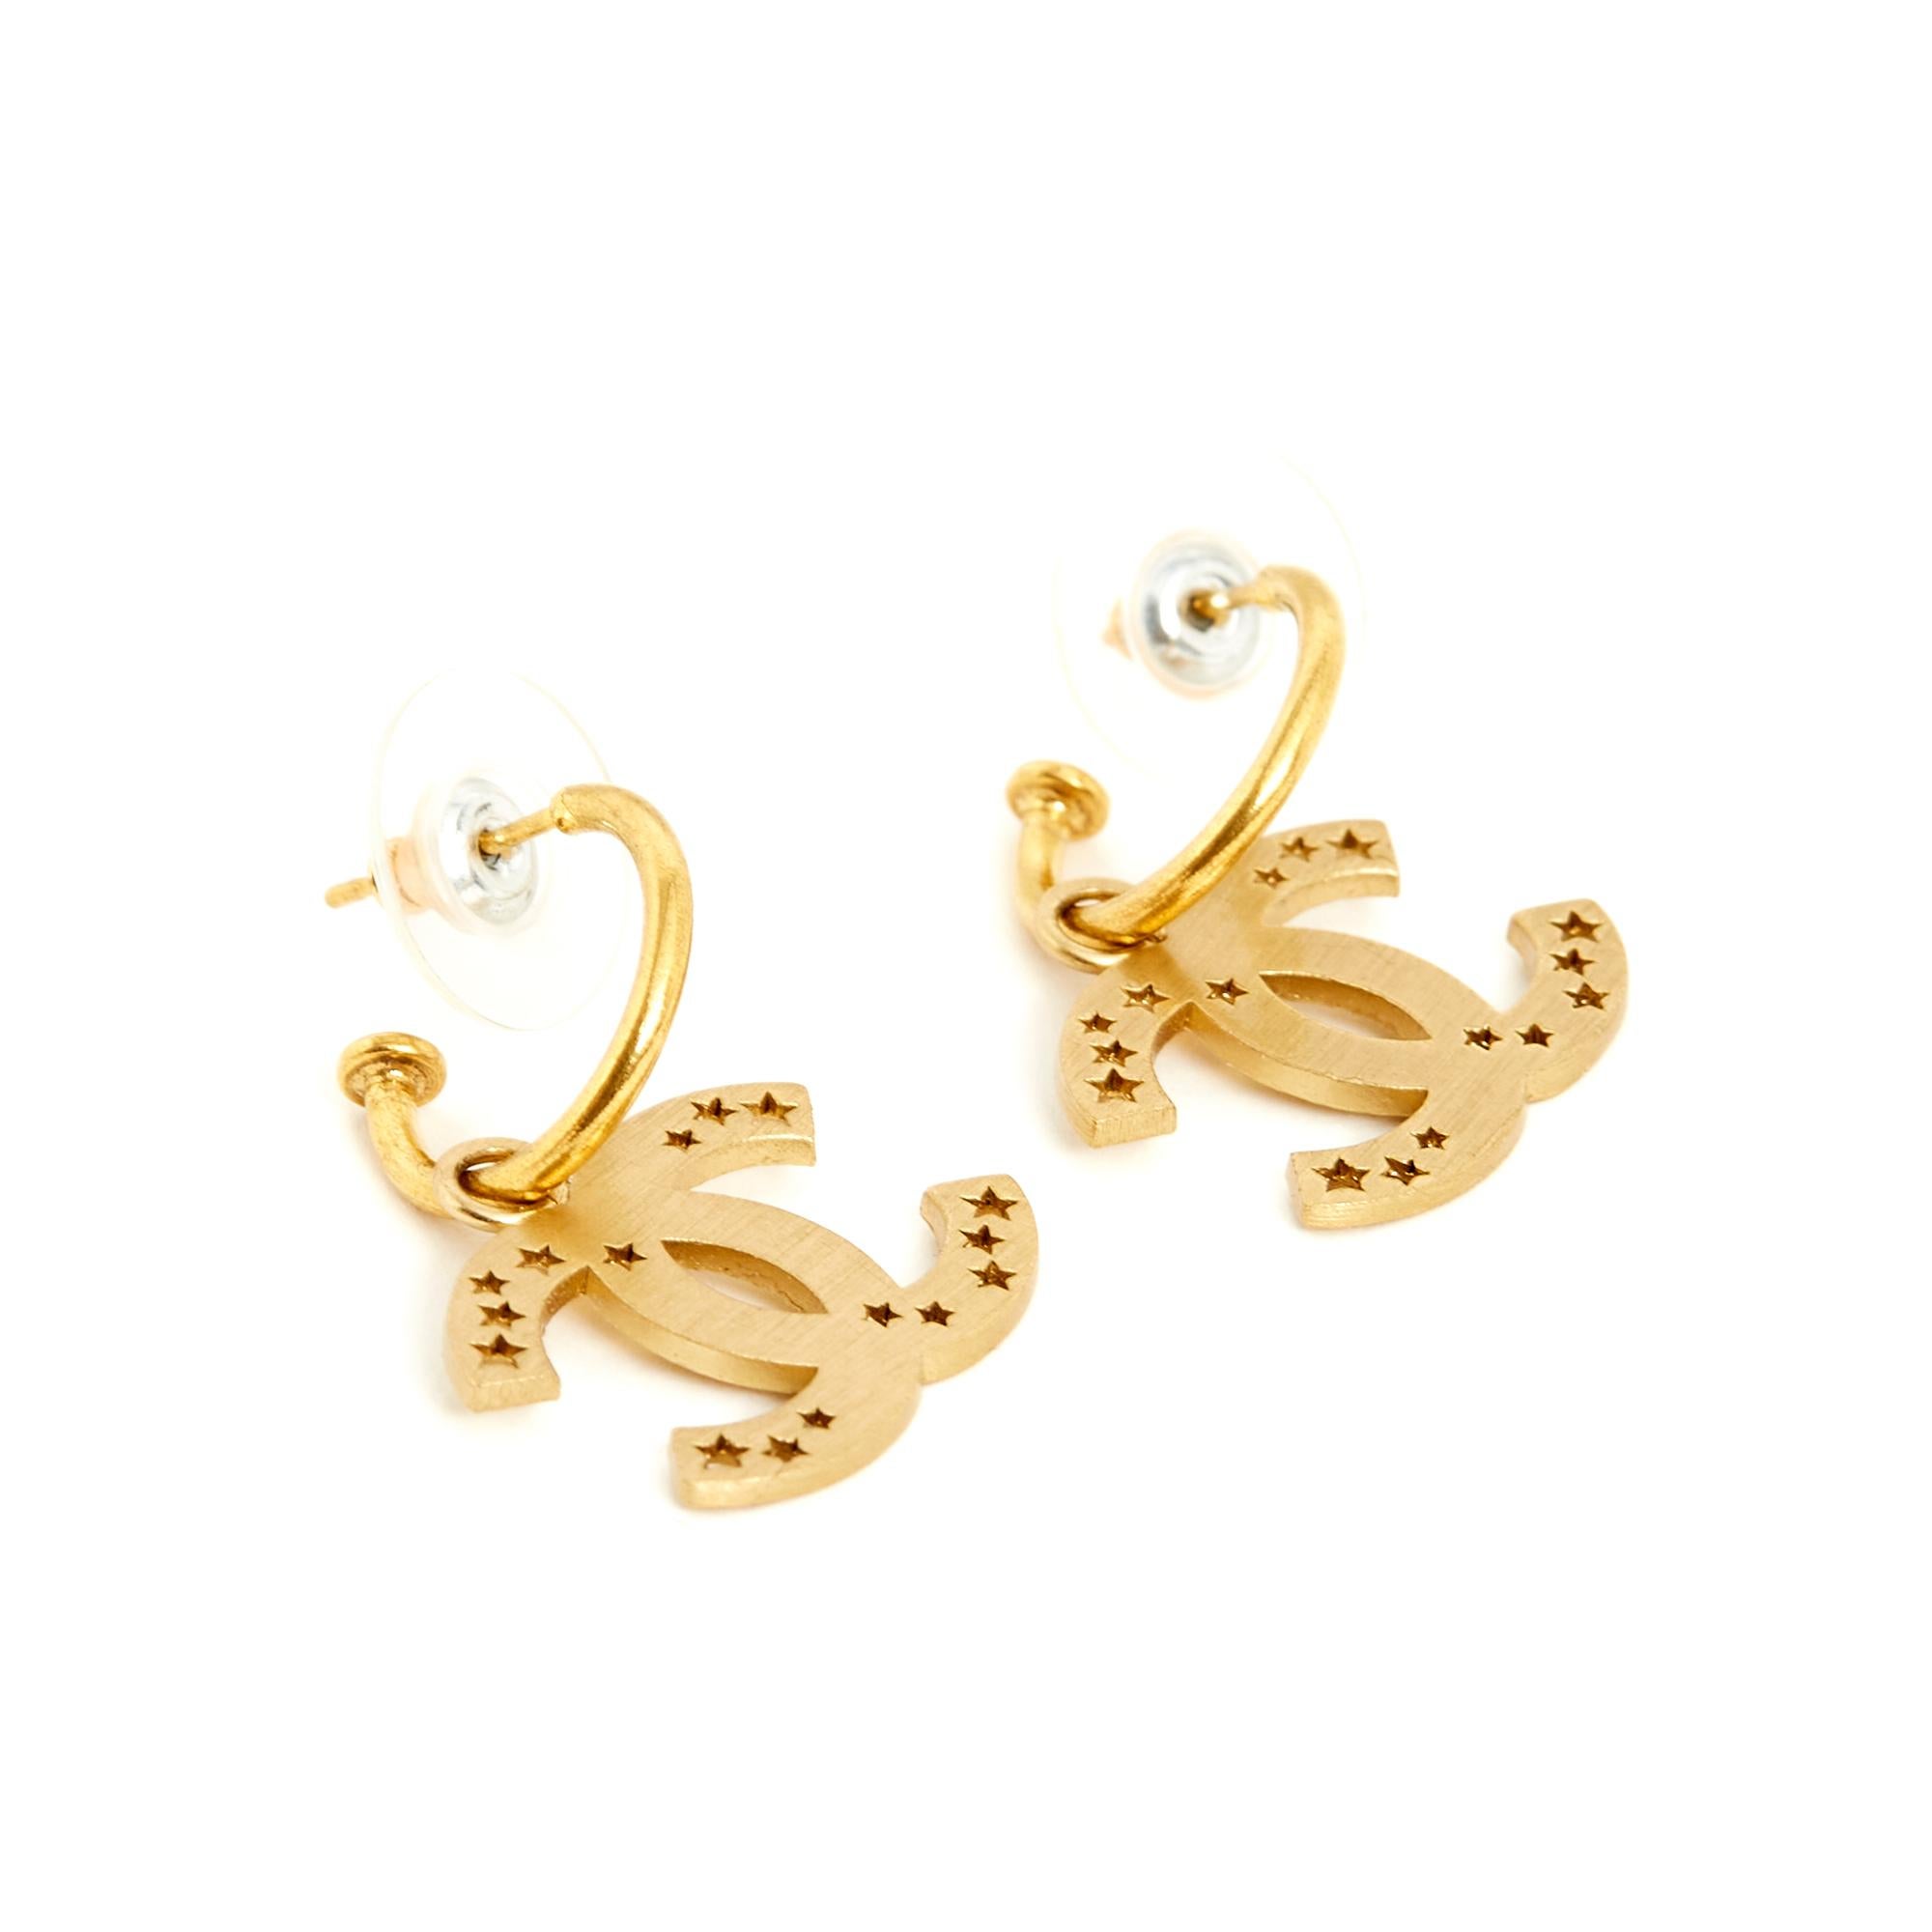 Chanel earrings in gold metal composed of a small hoop and a pendant with the motif of the CC logo in matte or brushed gold and openwork with small stars of different sizes. Diameter of the hoop 1.55 cm, dimensions of the CC 1.95 x 1.45 cm, total